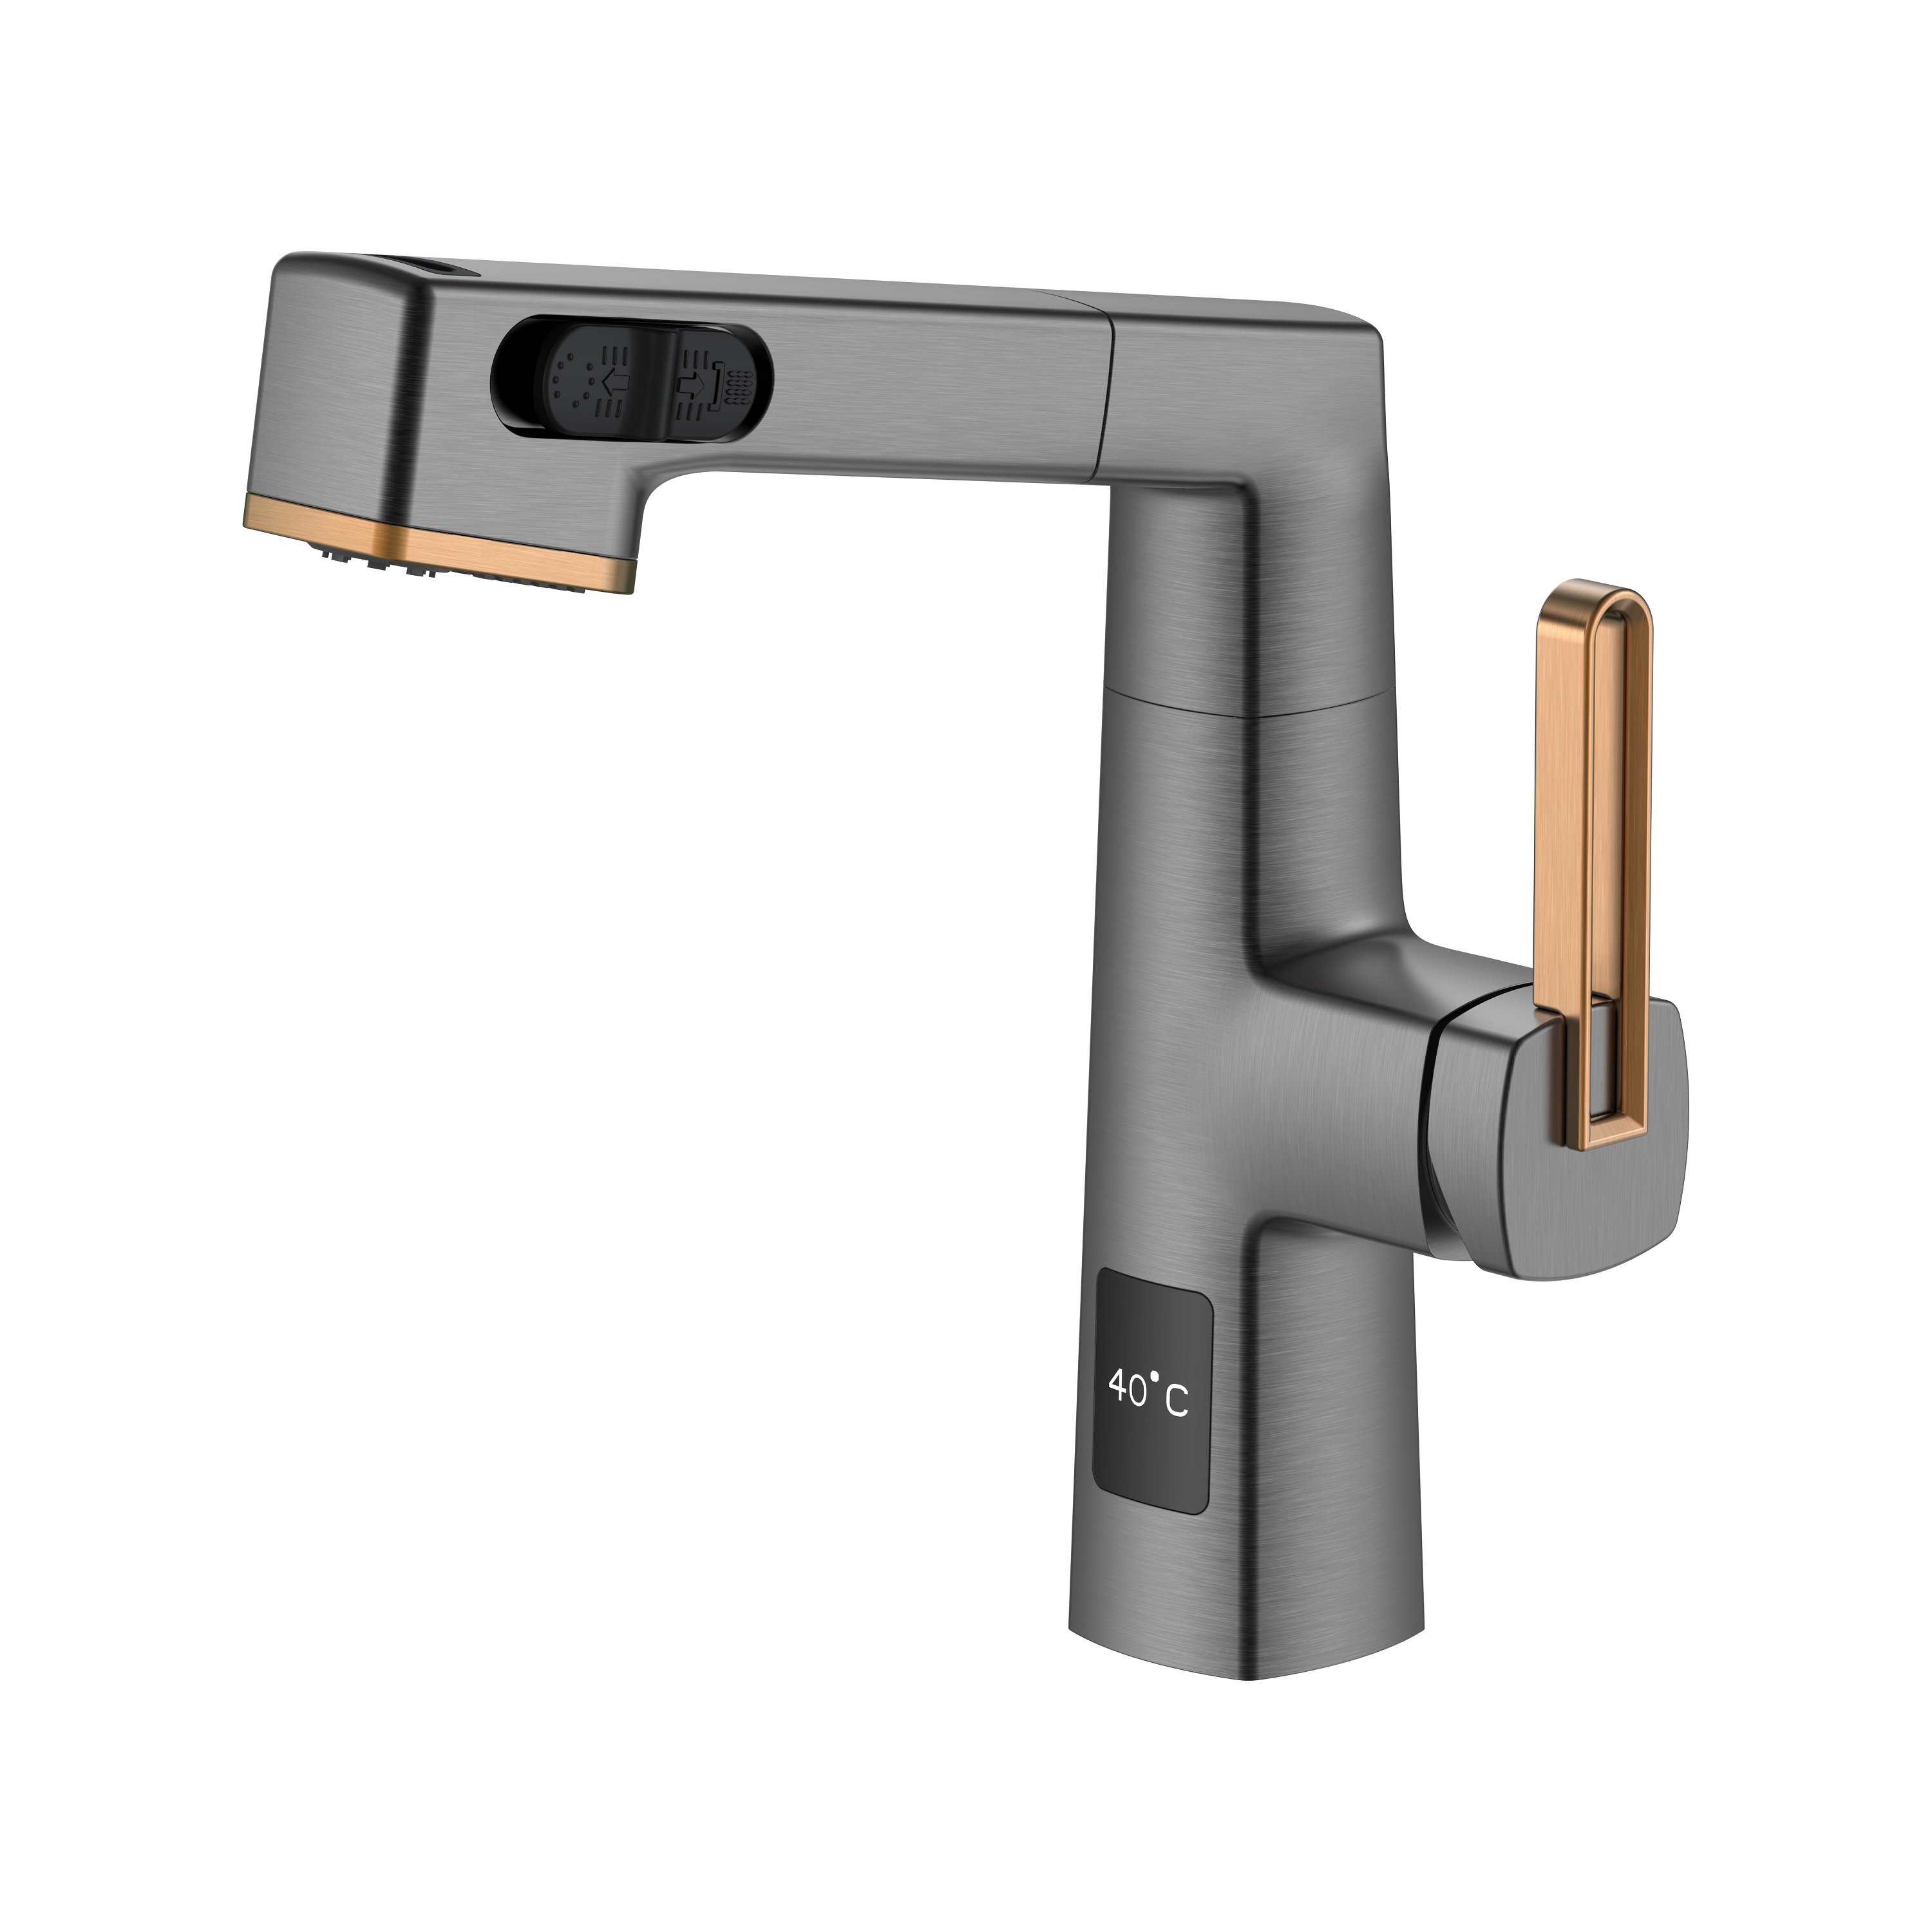  Temperature Display Unique Design Black Stainless And Rose Gold Pull Out Bathroom Faucet Adjustable Height